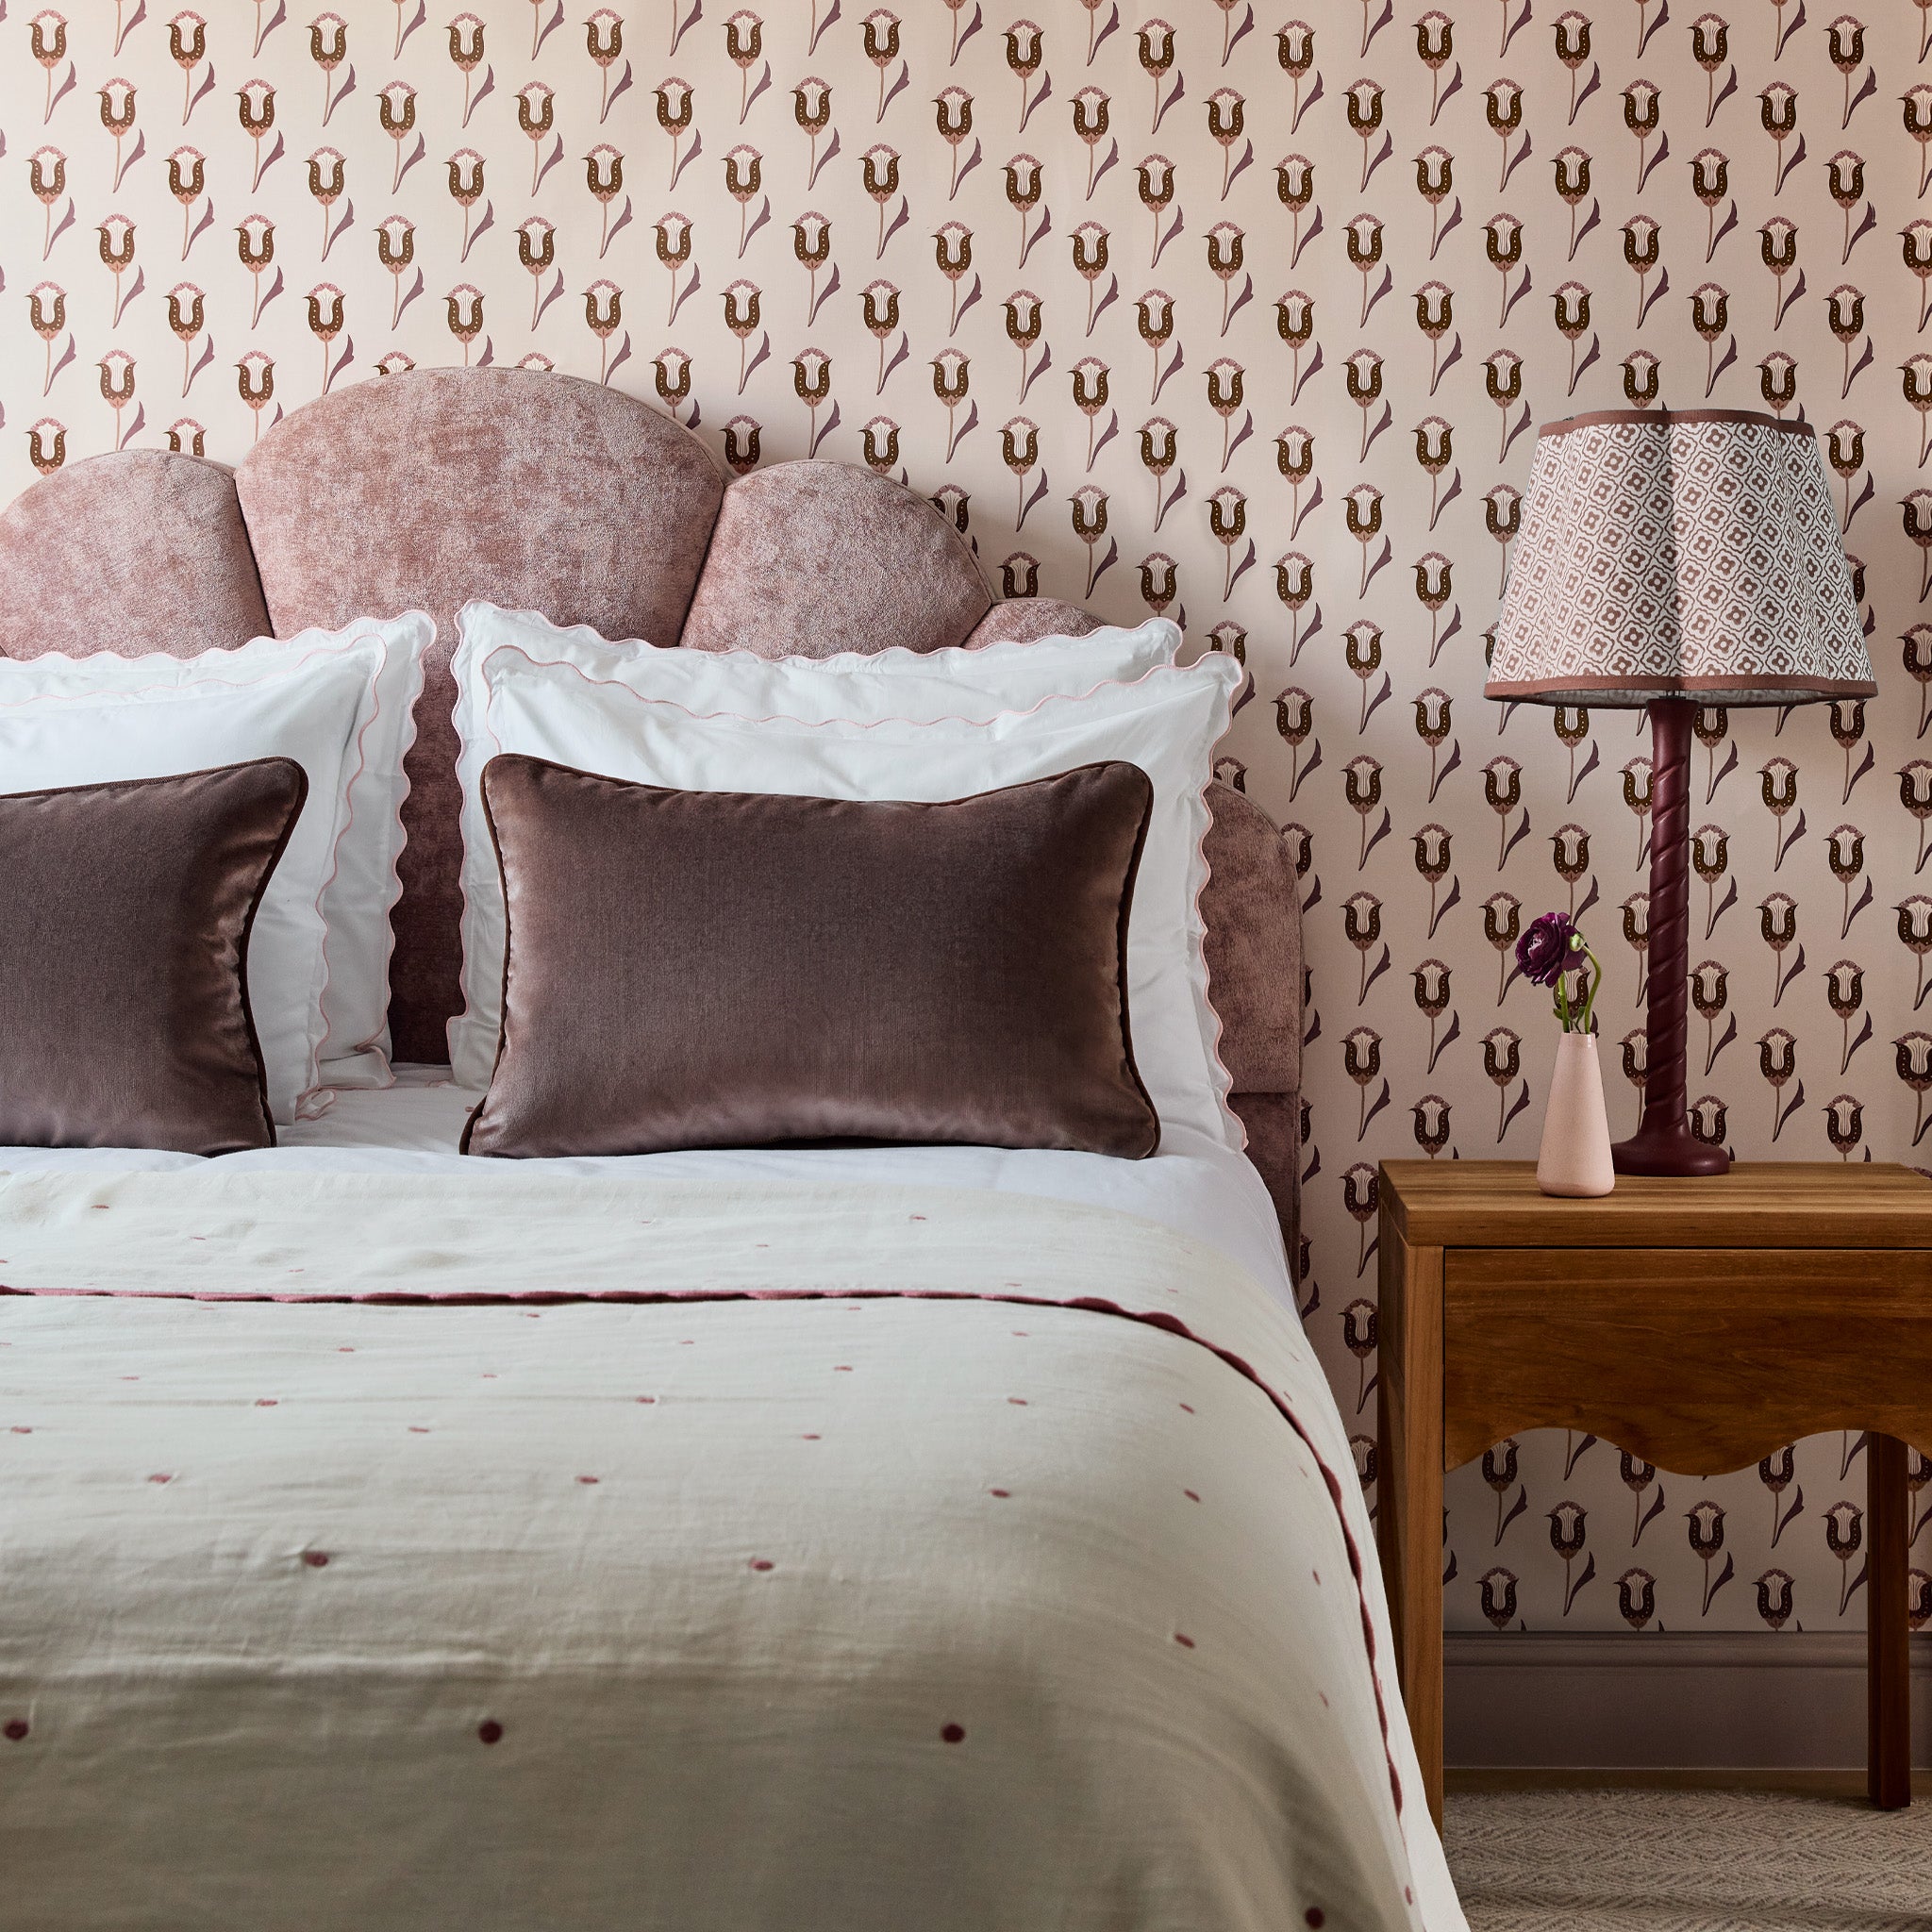 abstract floral pink and maroon wallpaper on a wall with a bed in front with white and mauve pillows and white bedding